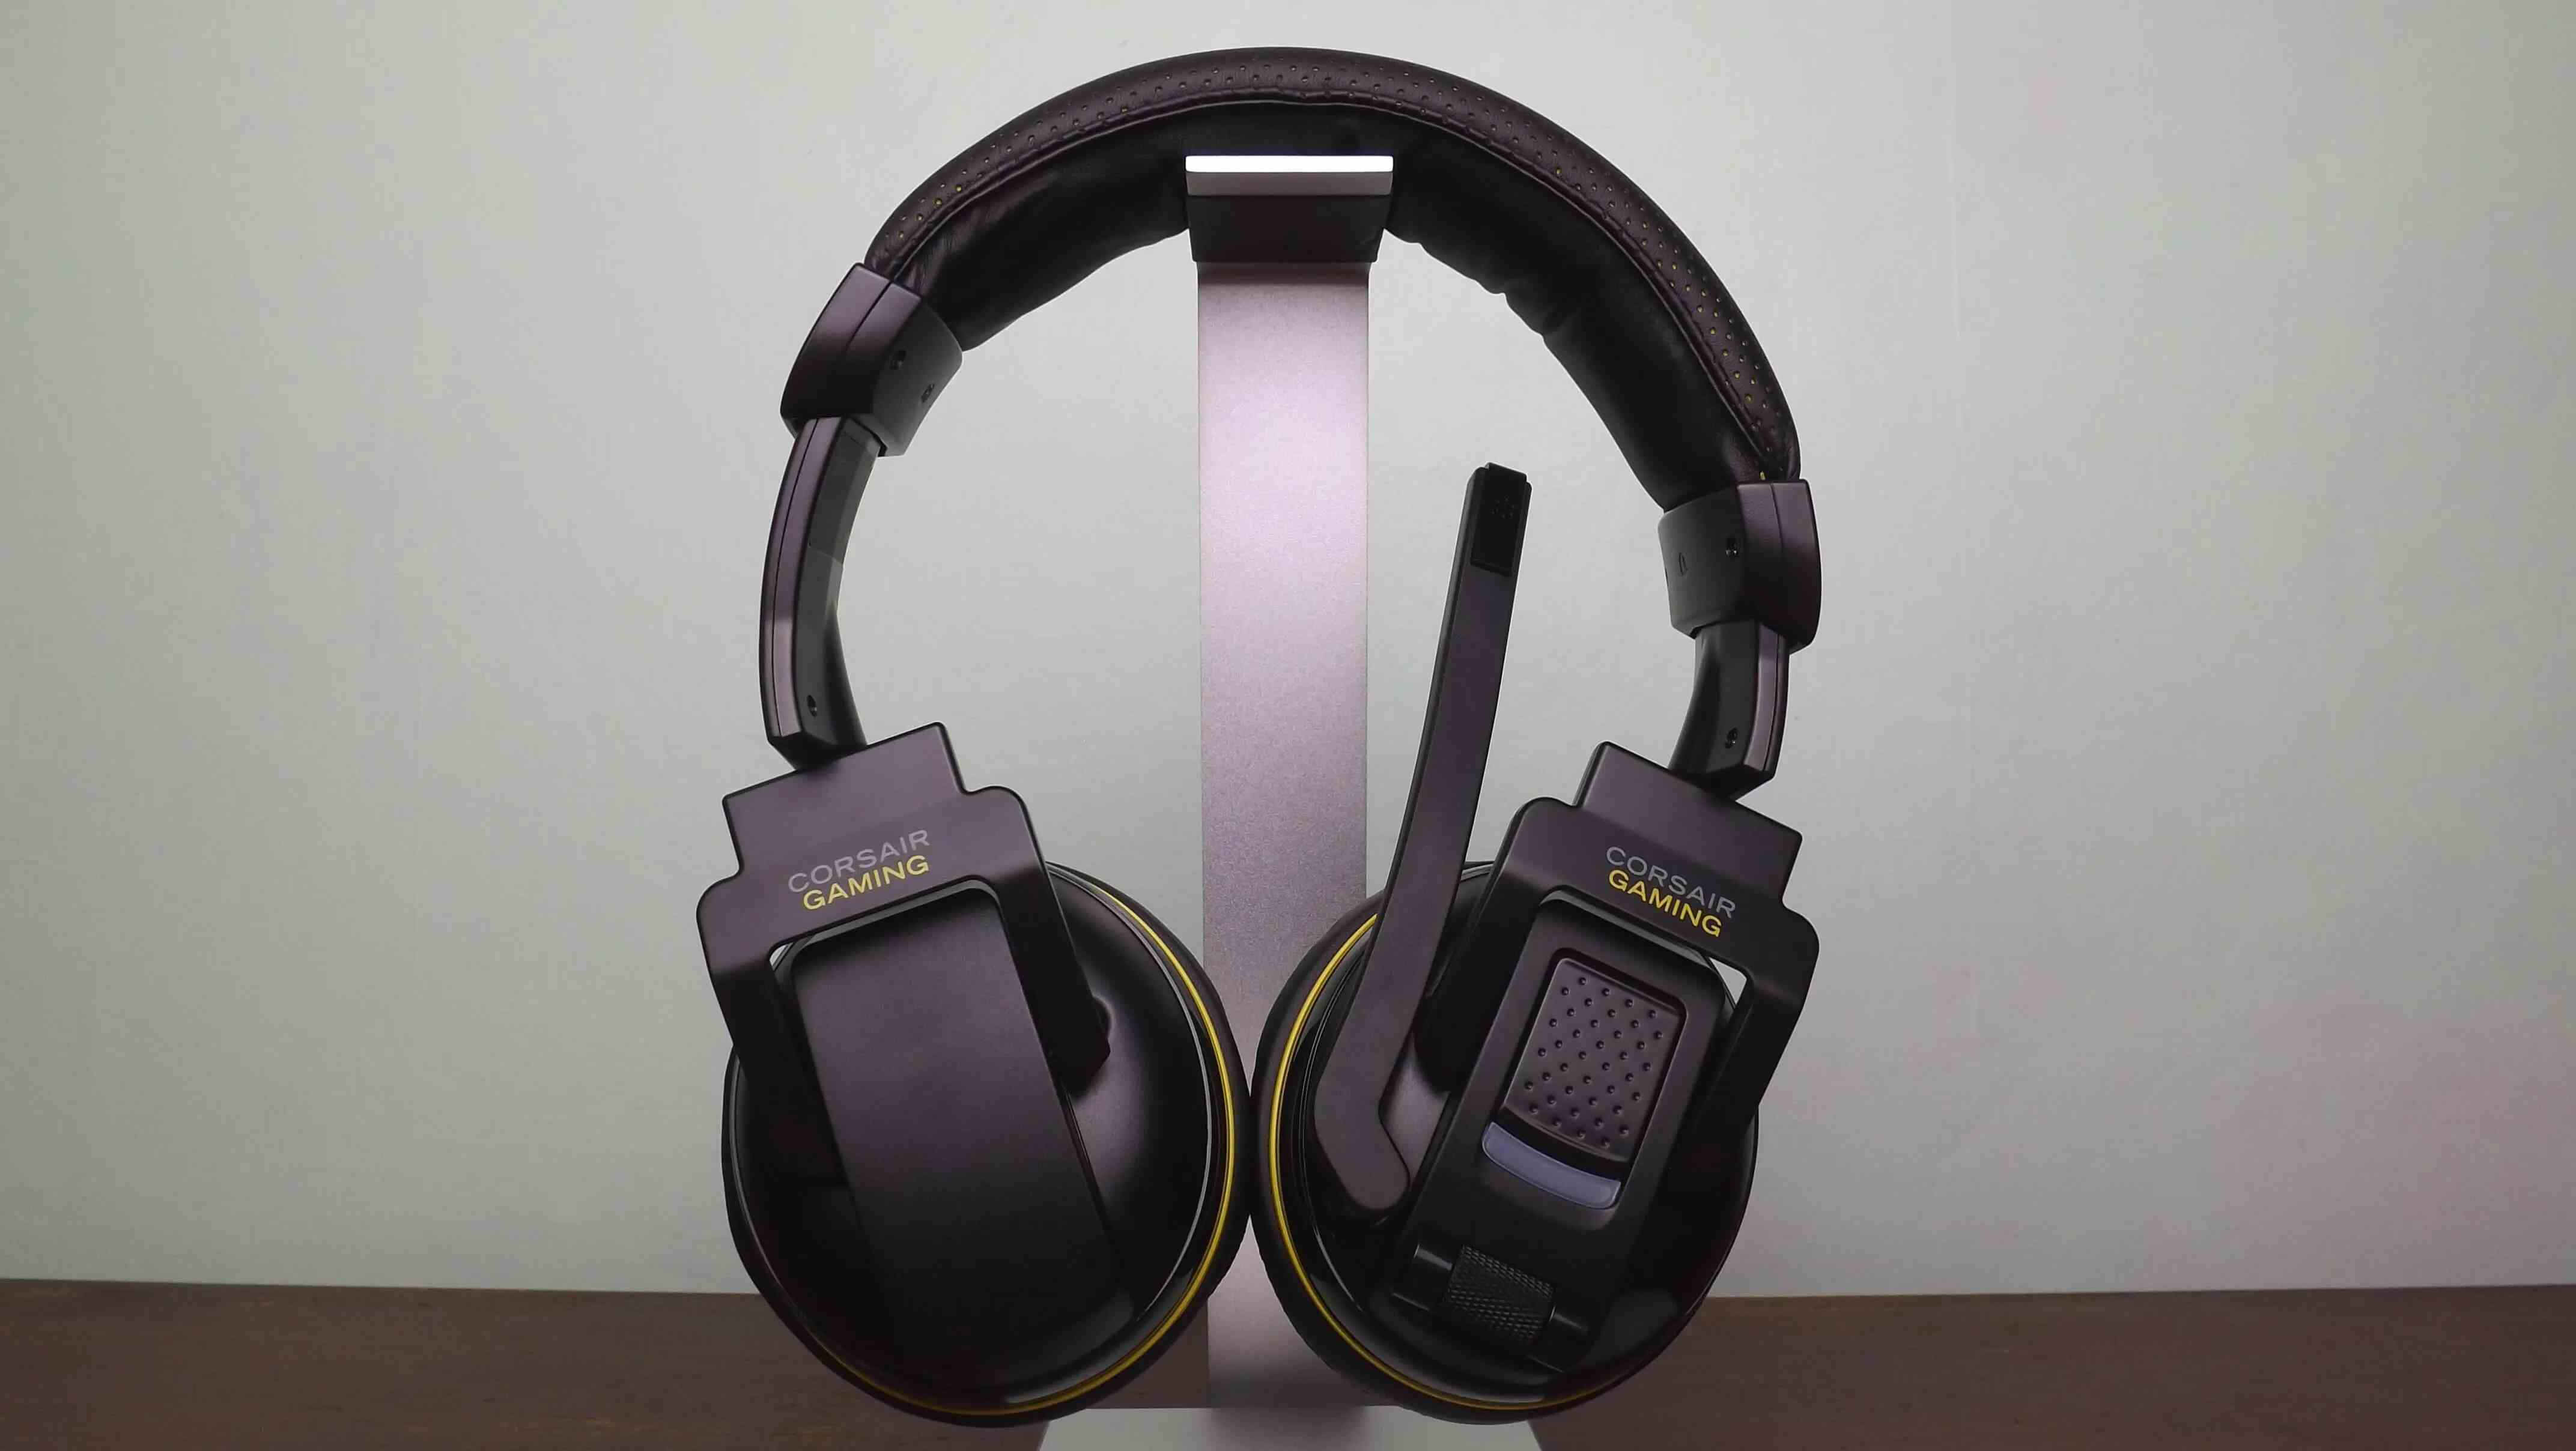 How To Connect A Corsair Gaming H2100 Wireless Dolby® 7.1 Gaming Headset